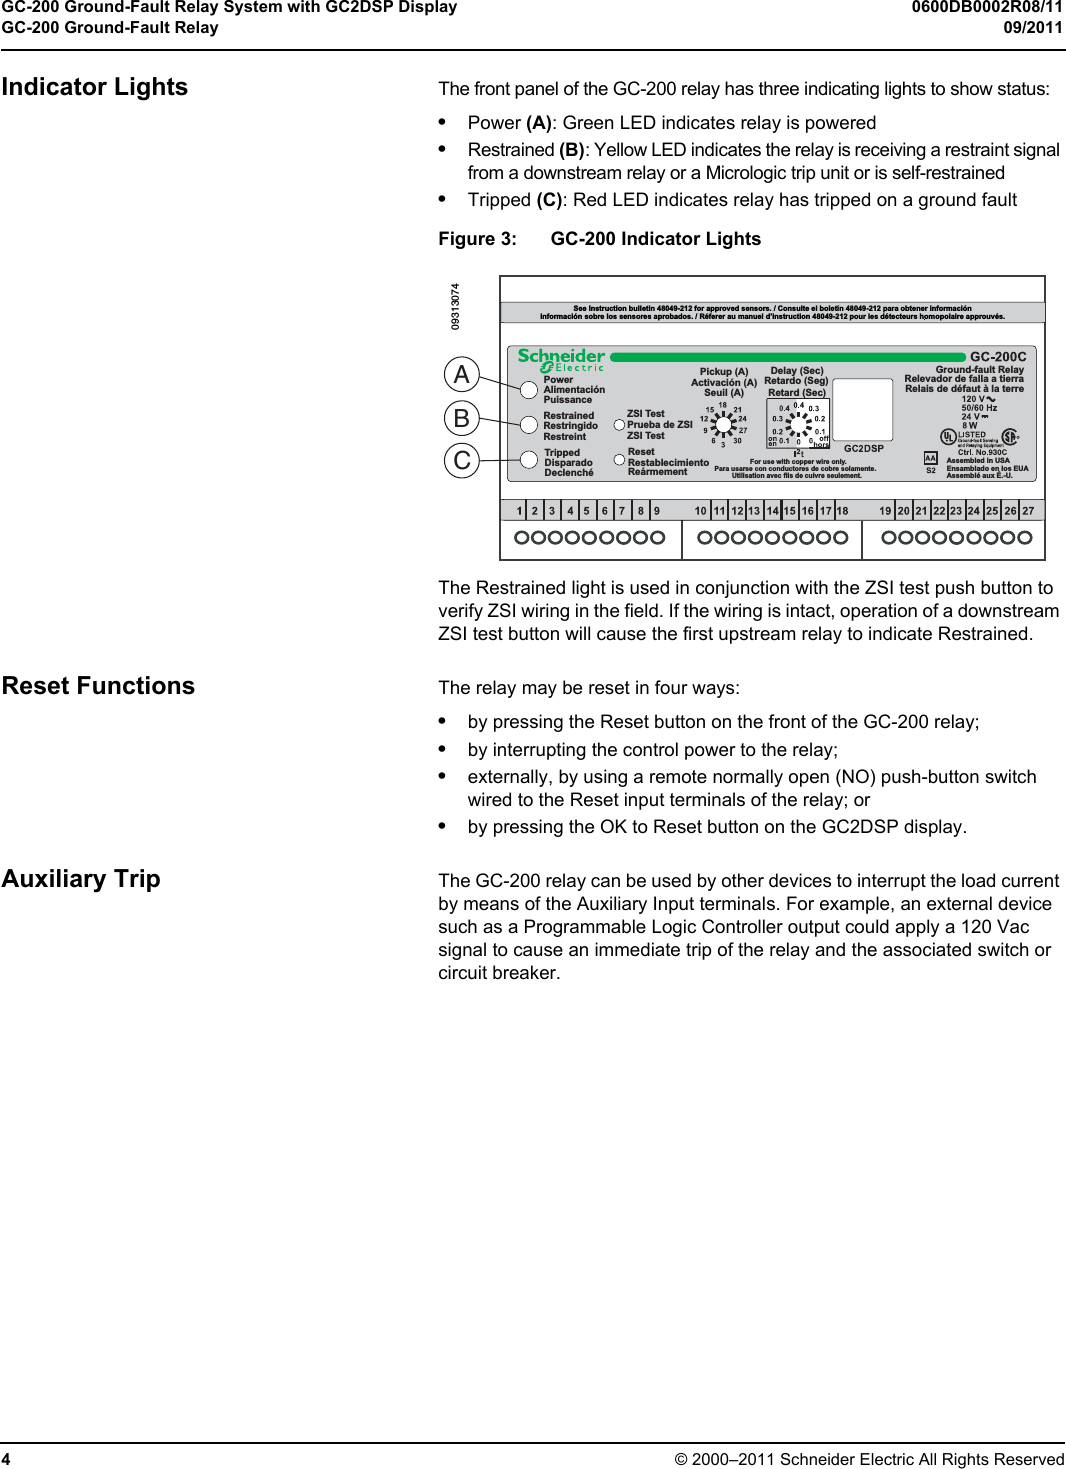 Page 4 of 12 - Product Detail Manual 